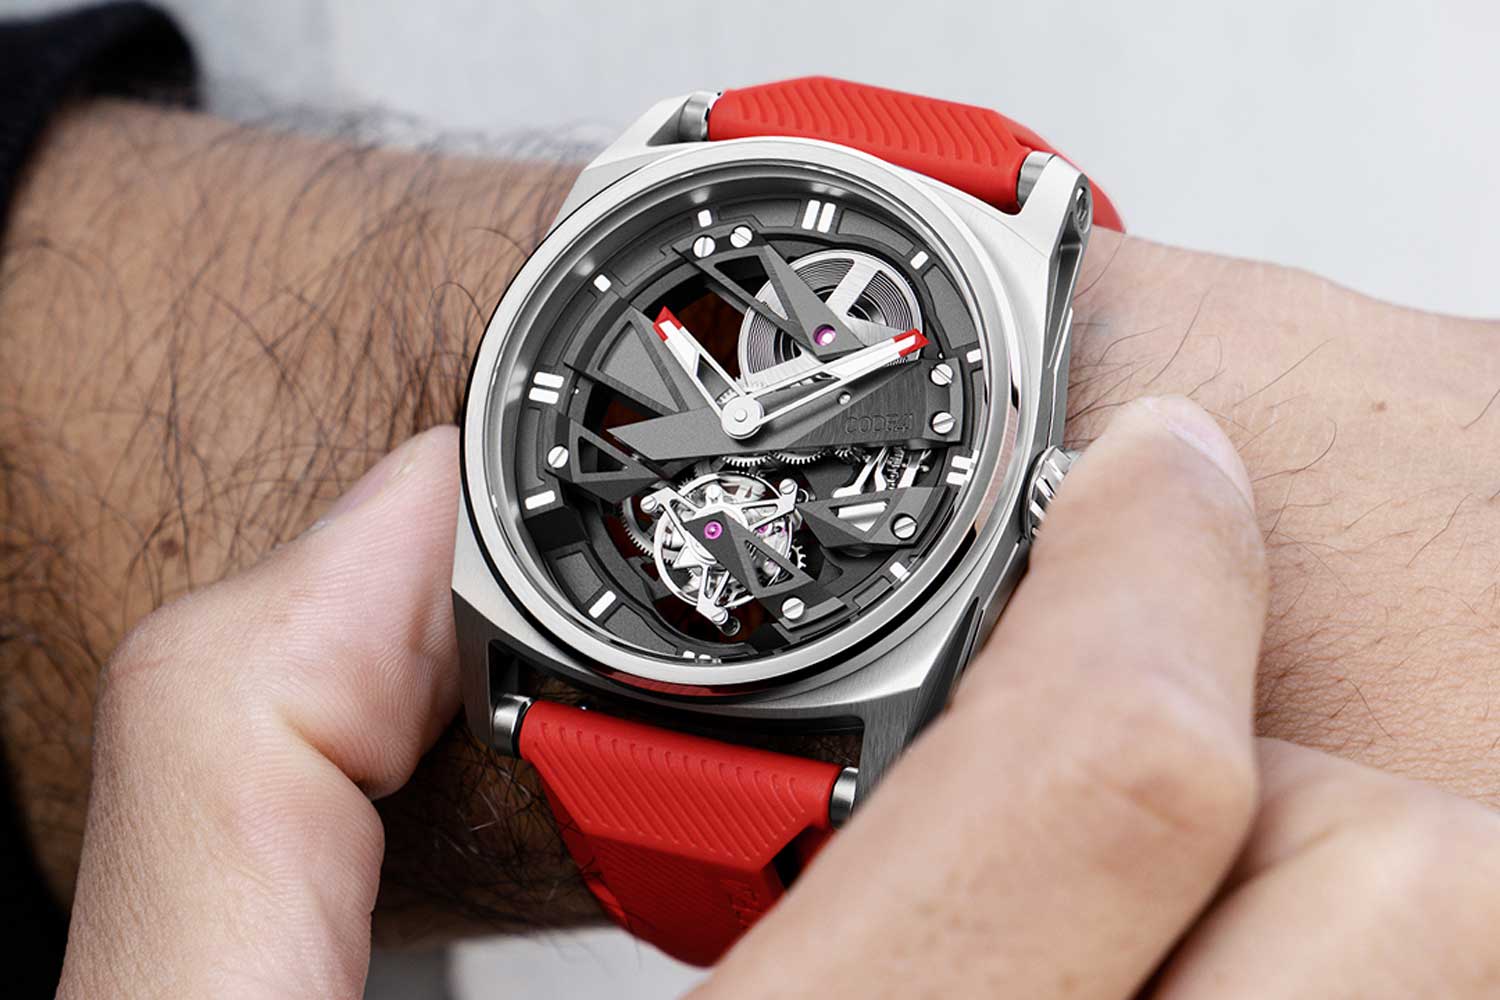 The seconds display consists of a “lumed” triangular hand on the tourbillon cage, which is almost invisible due to its small size compared to the arms of the cage, but serves its purpose